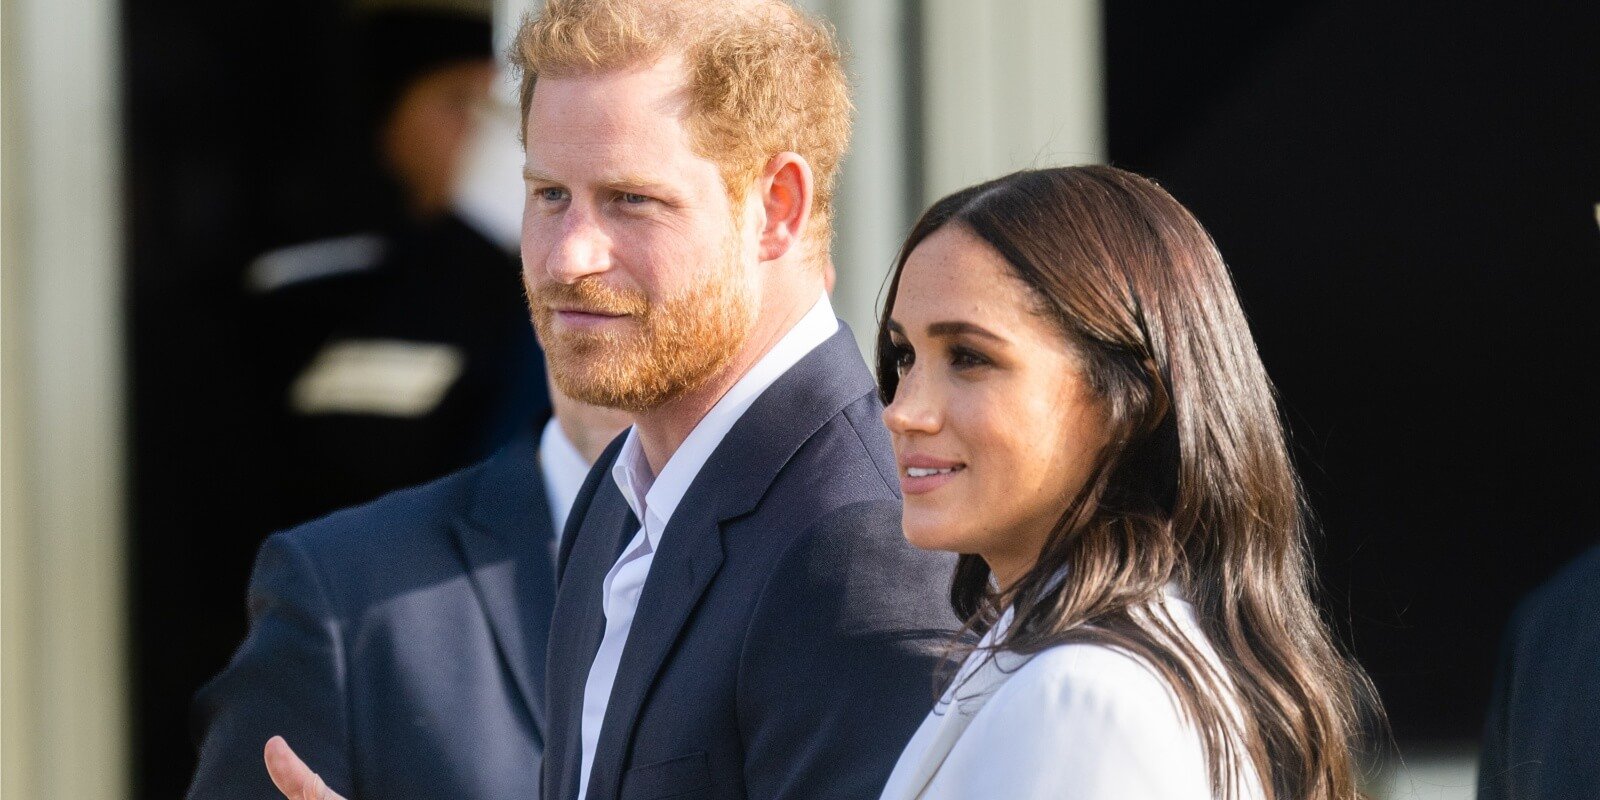 Prince Harry and Meghan Markle photographed at a reception for friends and family of competitors of the Invictus Games at Nations Home at Zuiderpark on April 15, 2022 in The Hague, Netherlands.